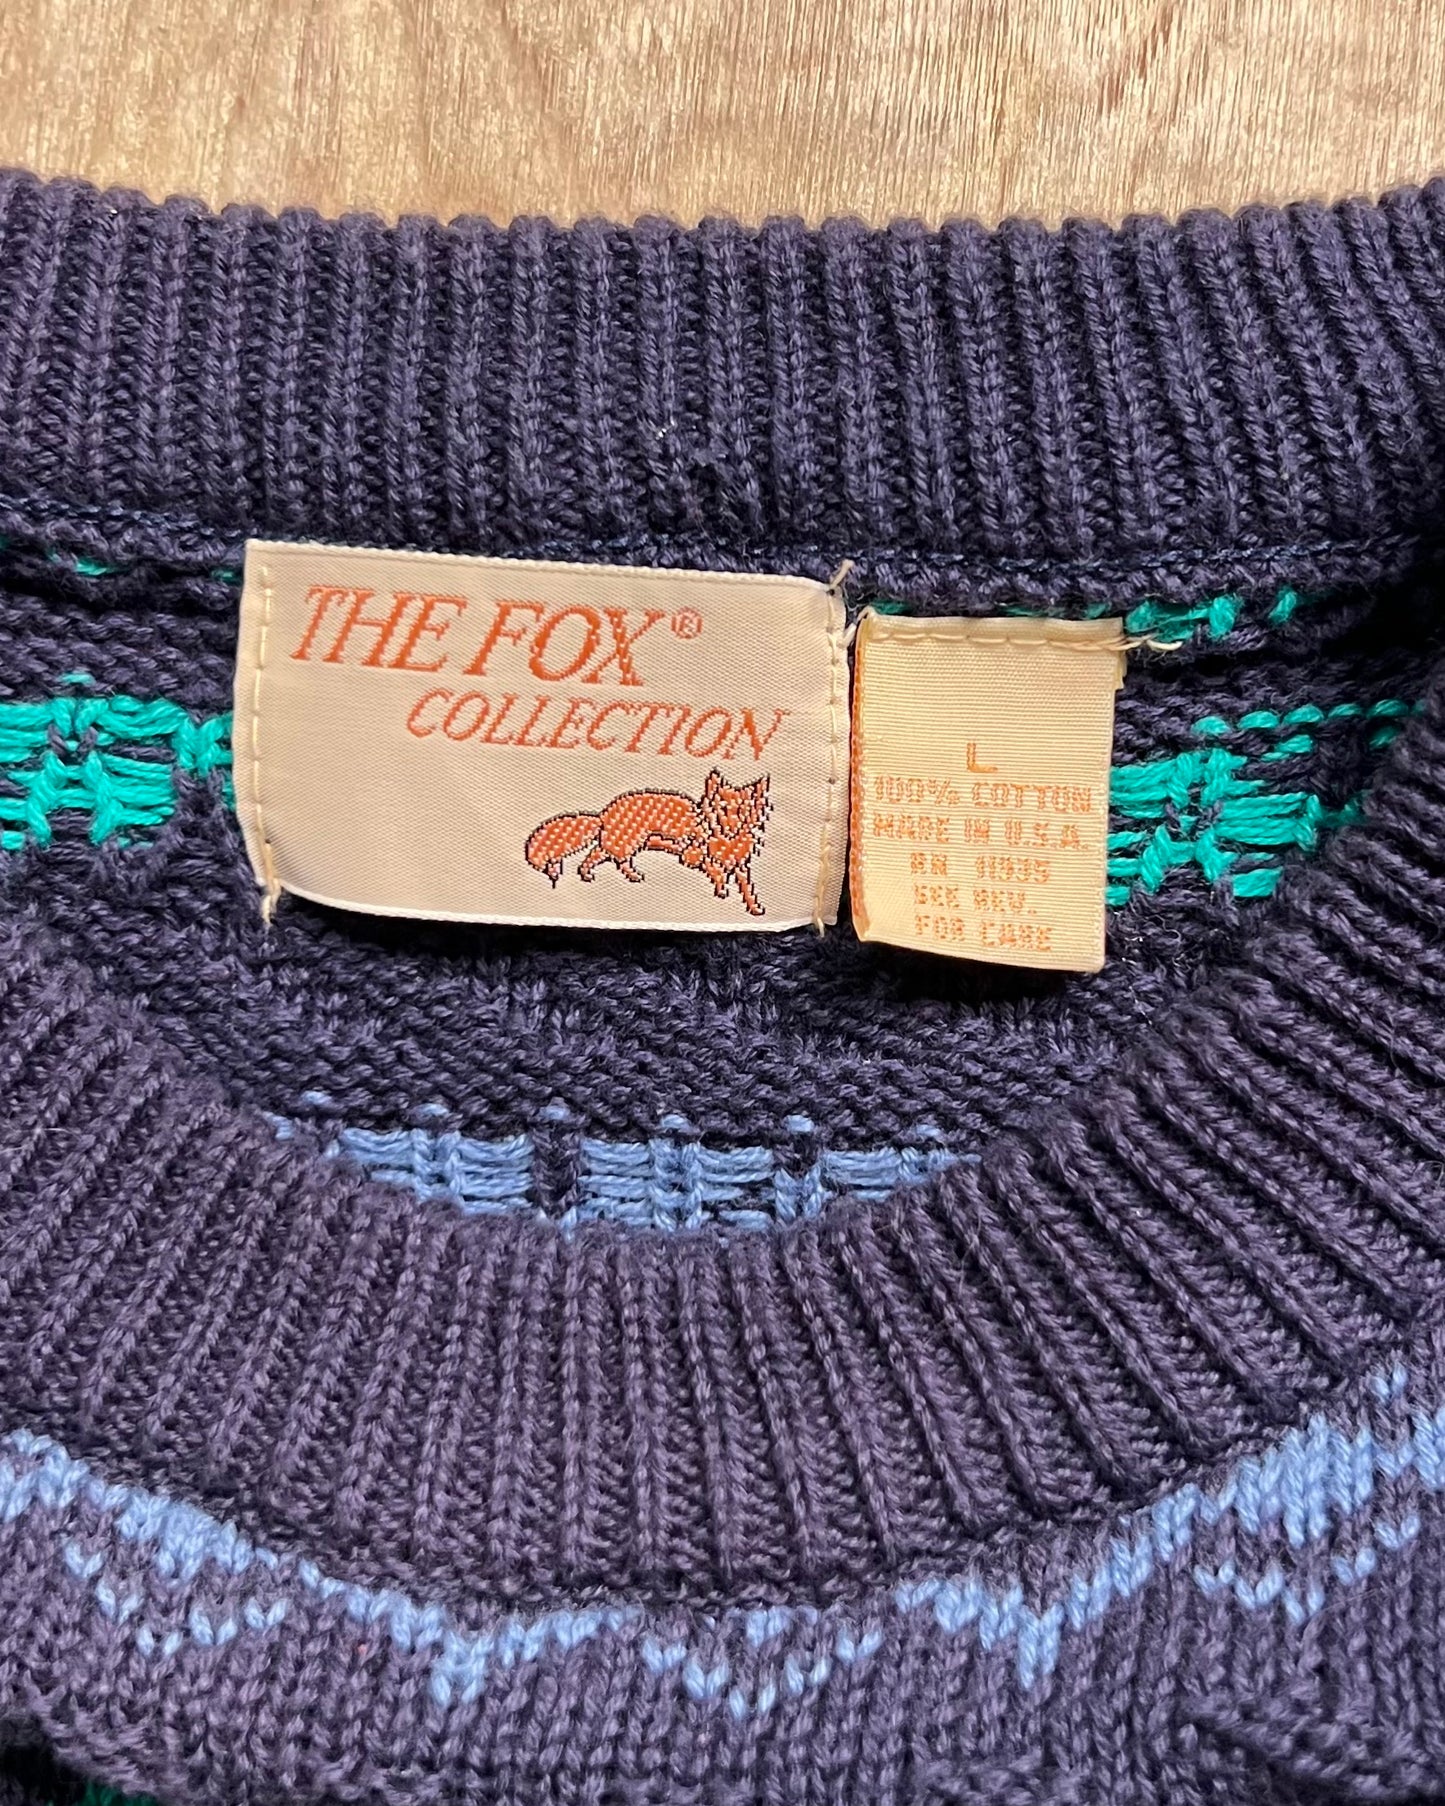 Vintage The Fox Collection Sweater